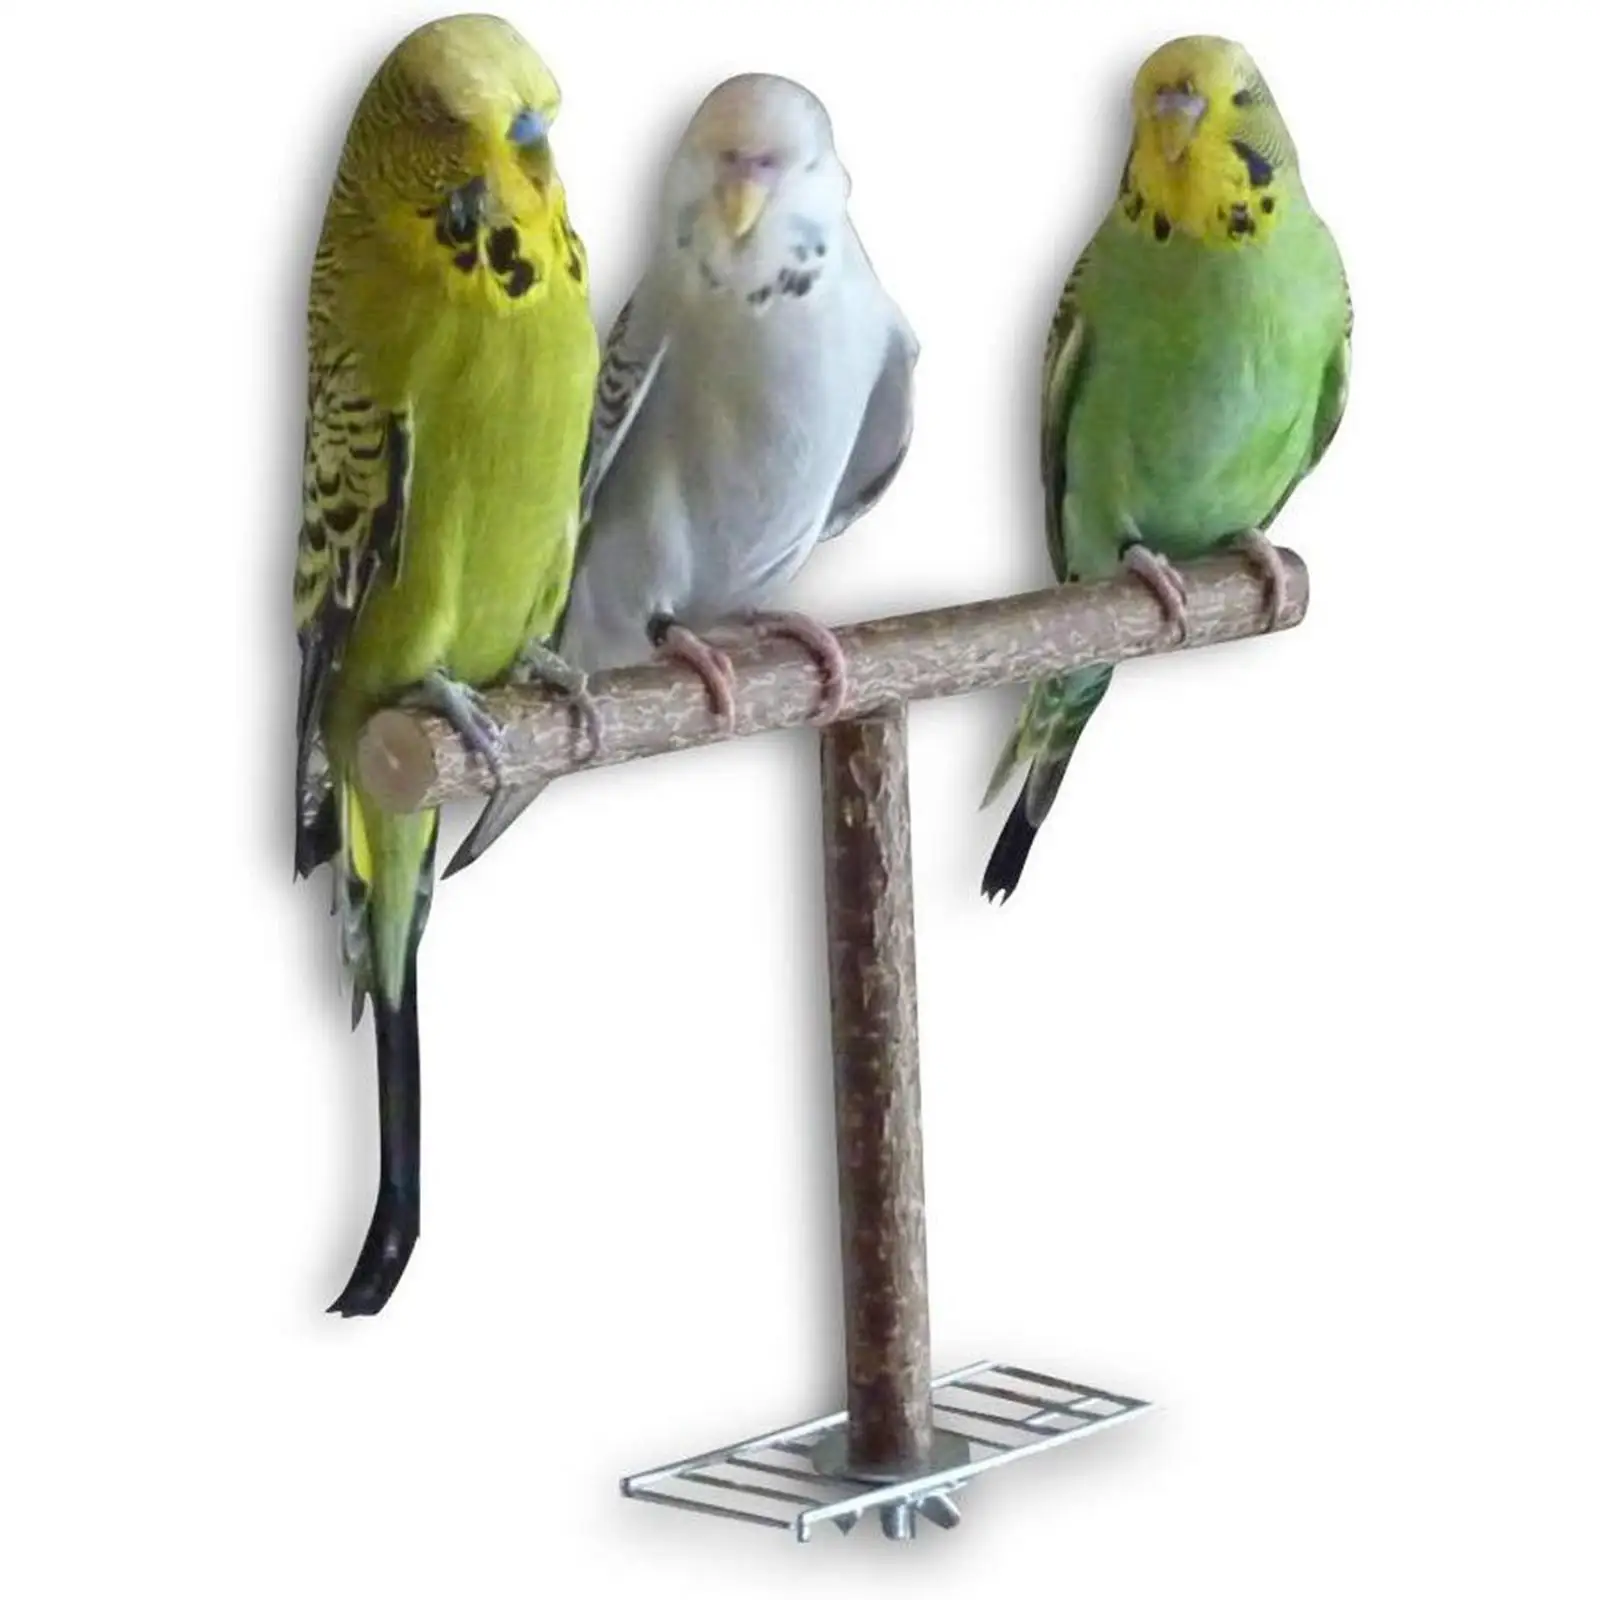 Chewing Toy Parakeet Toy Bird Cage Accessories Parrot Wooden Perch Bird stand Bird Accessories Finches Conures Exercise